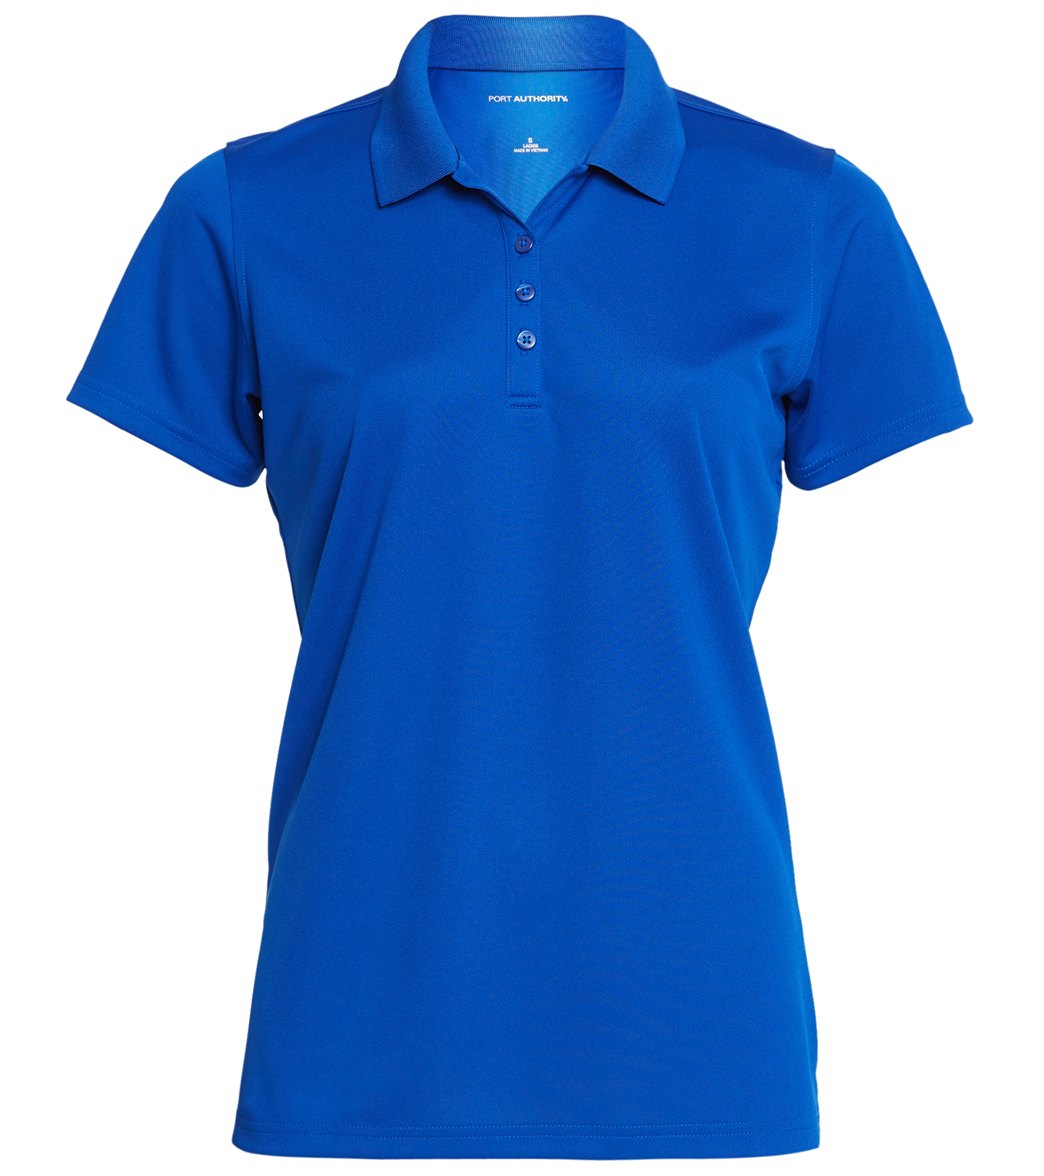 Women's Dry Zone Uv Micro-Mesh Polo - Cobalt Large Polyester - Swimoutlet.com